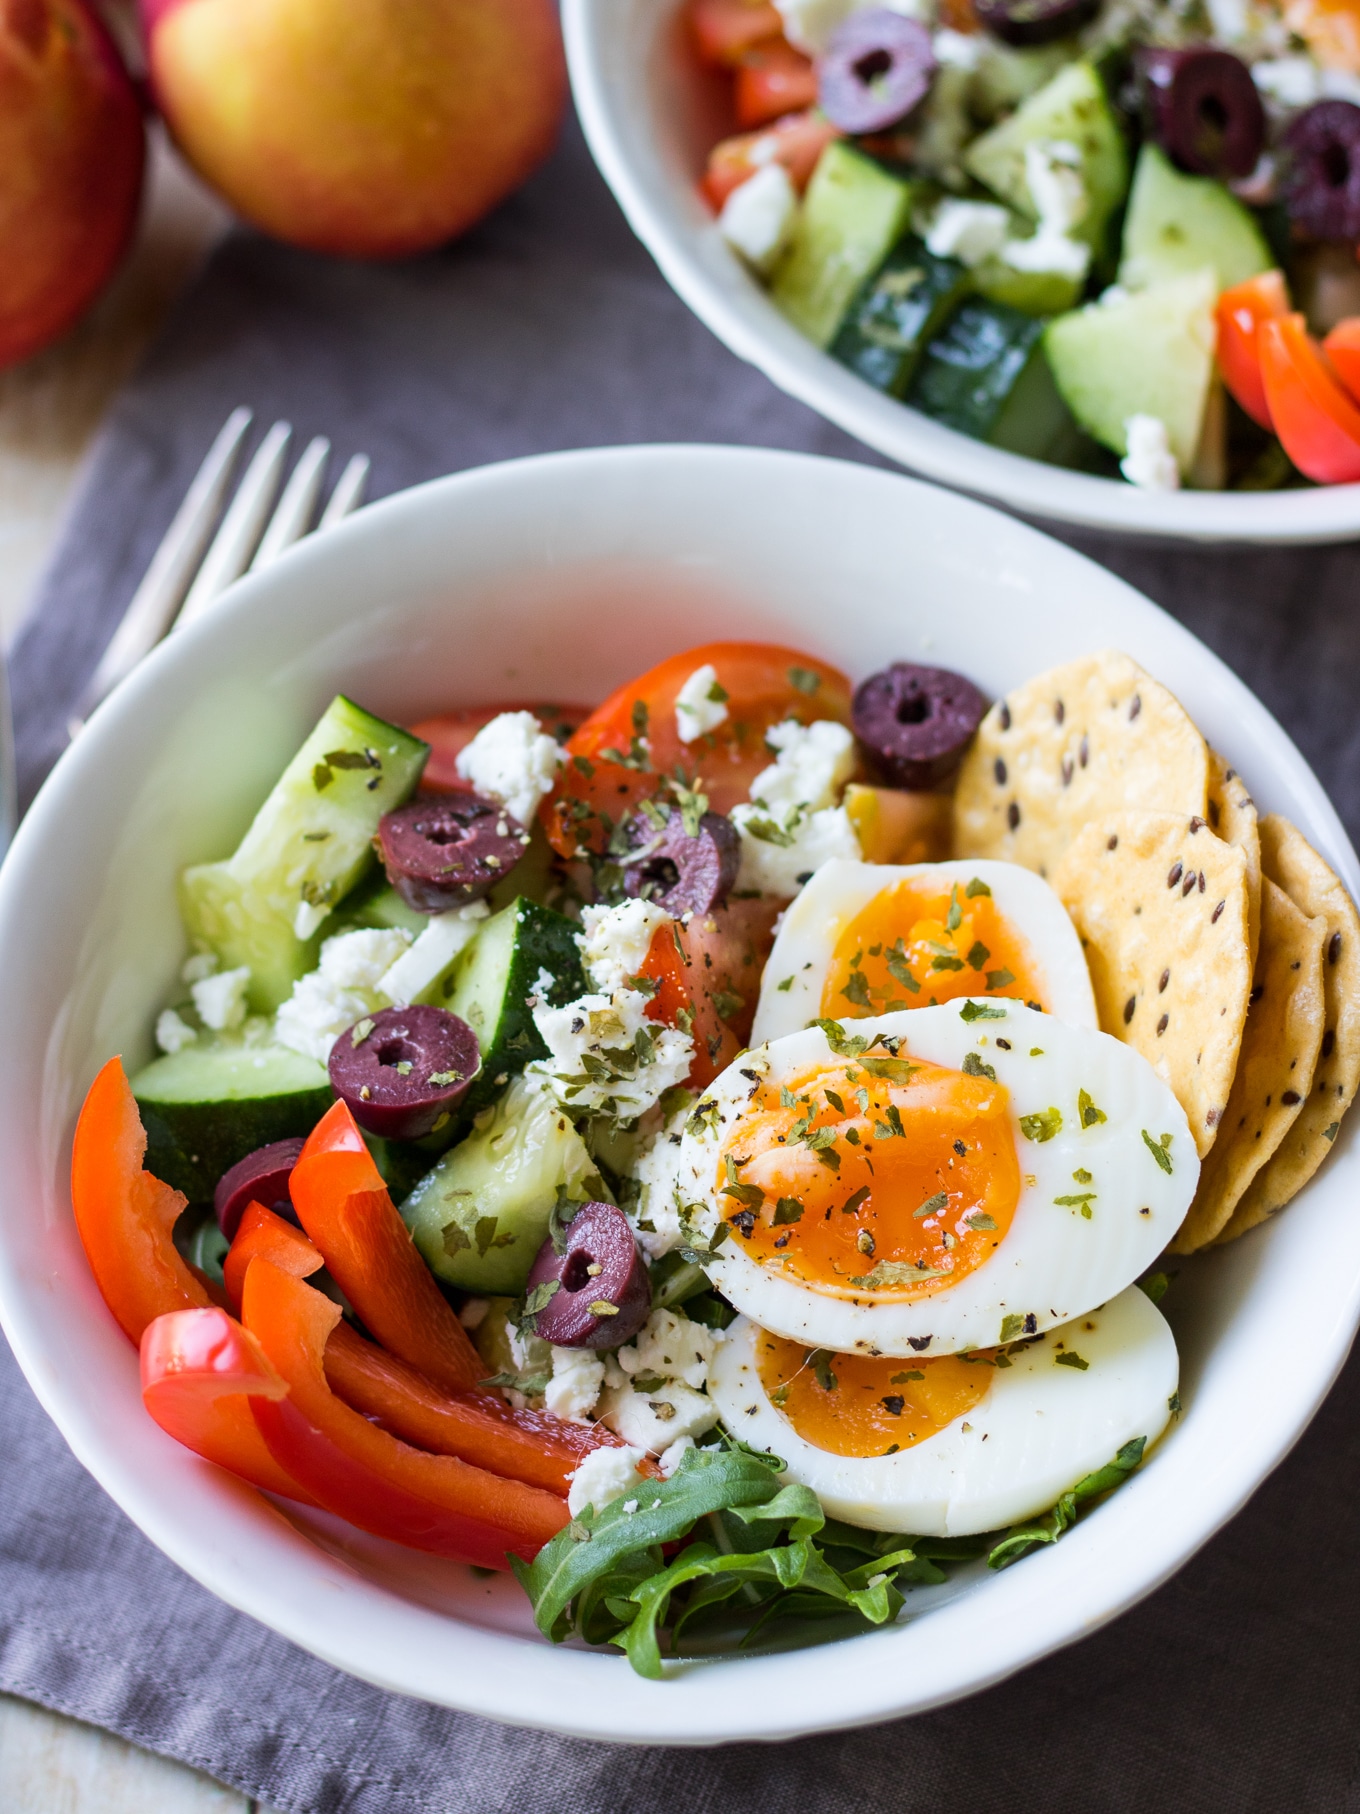 Meal prep breakfast bowls Greek style! Take boiled eggs and add cucumber, tomatoes, capsicum, feta and olives. Loads of fresh veggies and protein will give you the best healthy start to the day! #breakfastbowl #mealprep #glutenfree #breakfastsalad